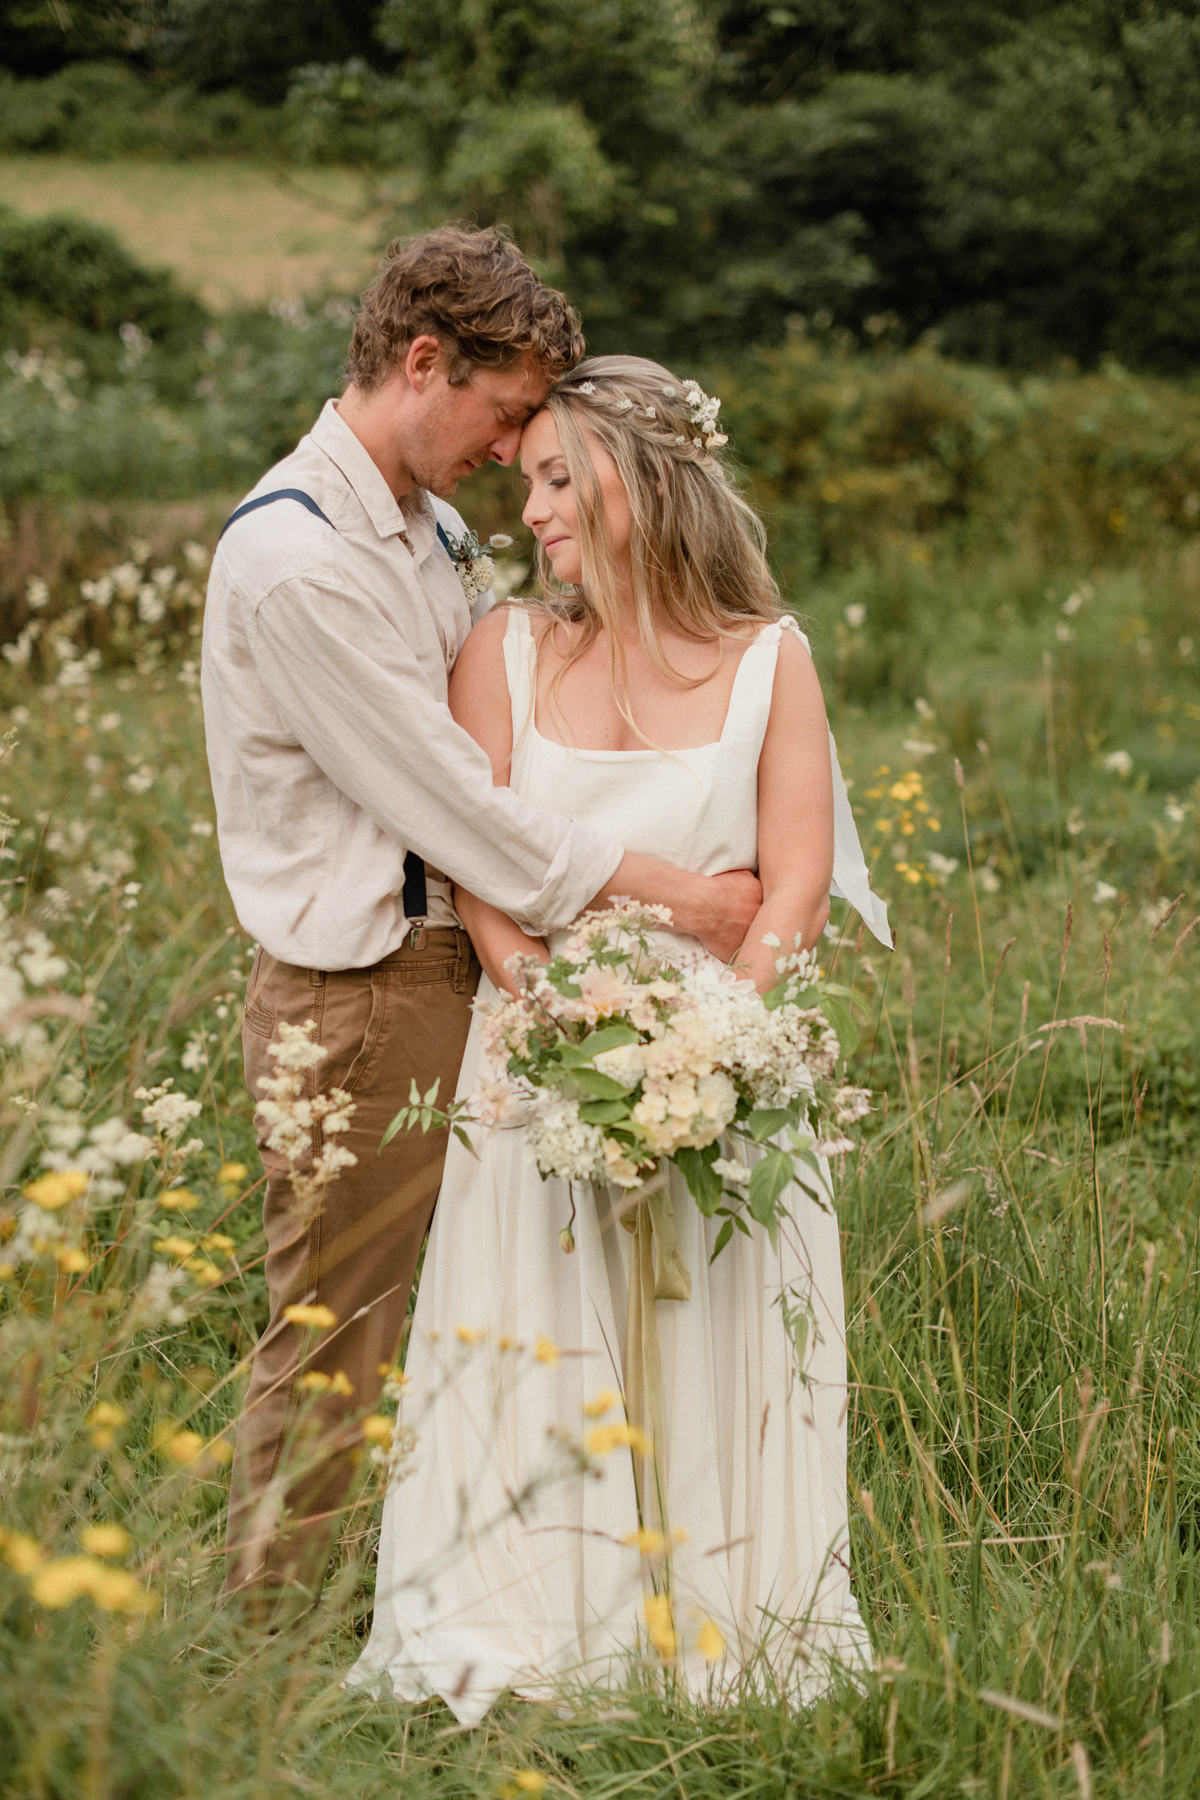 Camel Studio: County wedding venue in Cornwall. Bride & groom embracing. Bride has flower sin her hair & carries a natural wedding bouquet with silk ribbons. 